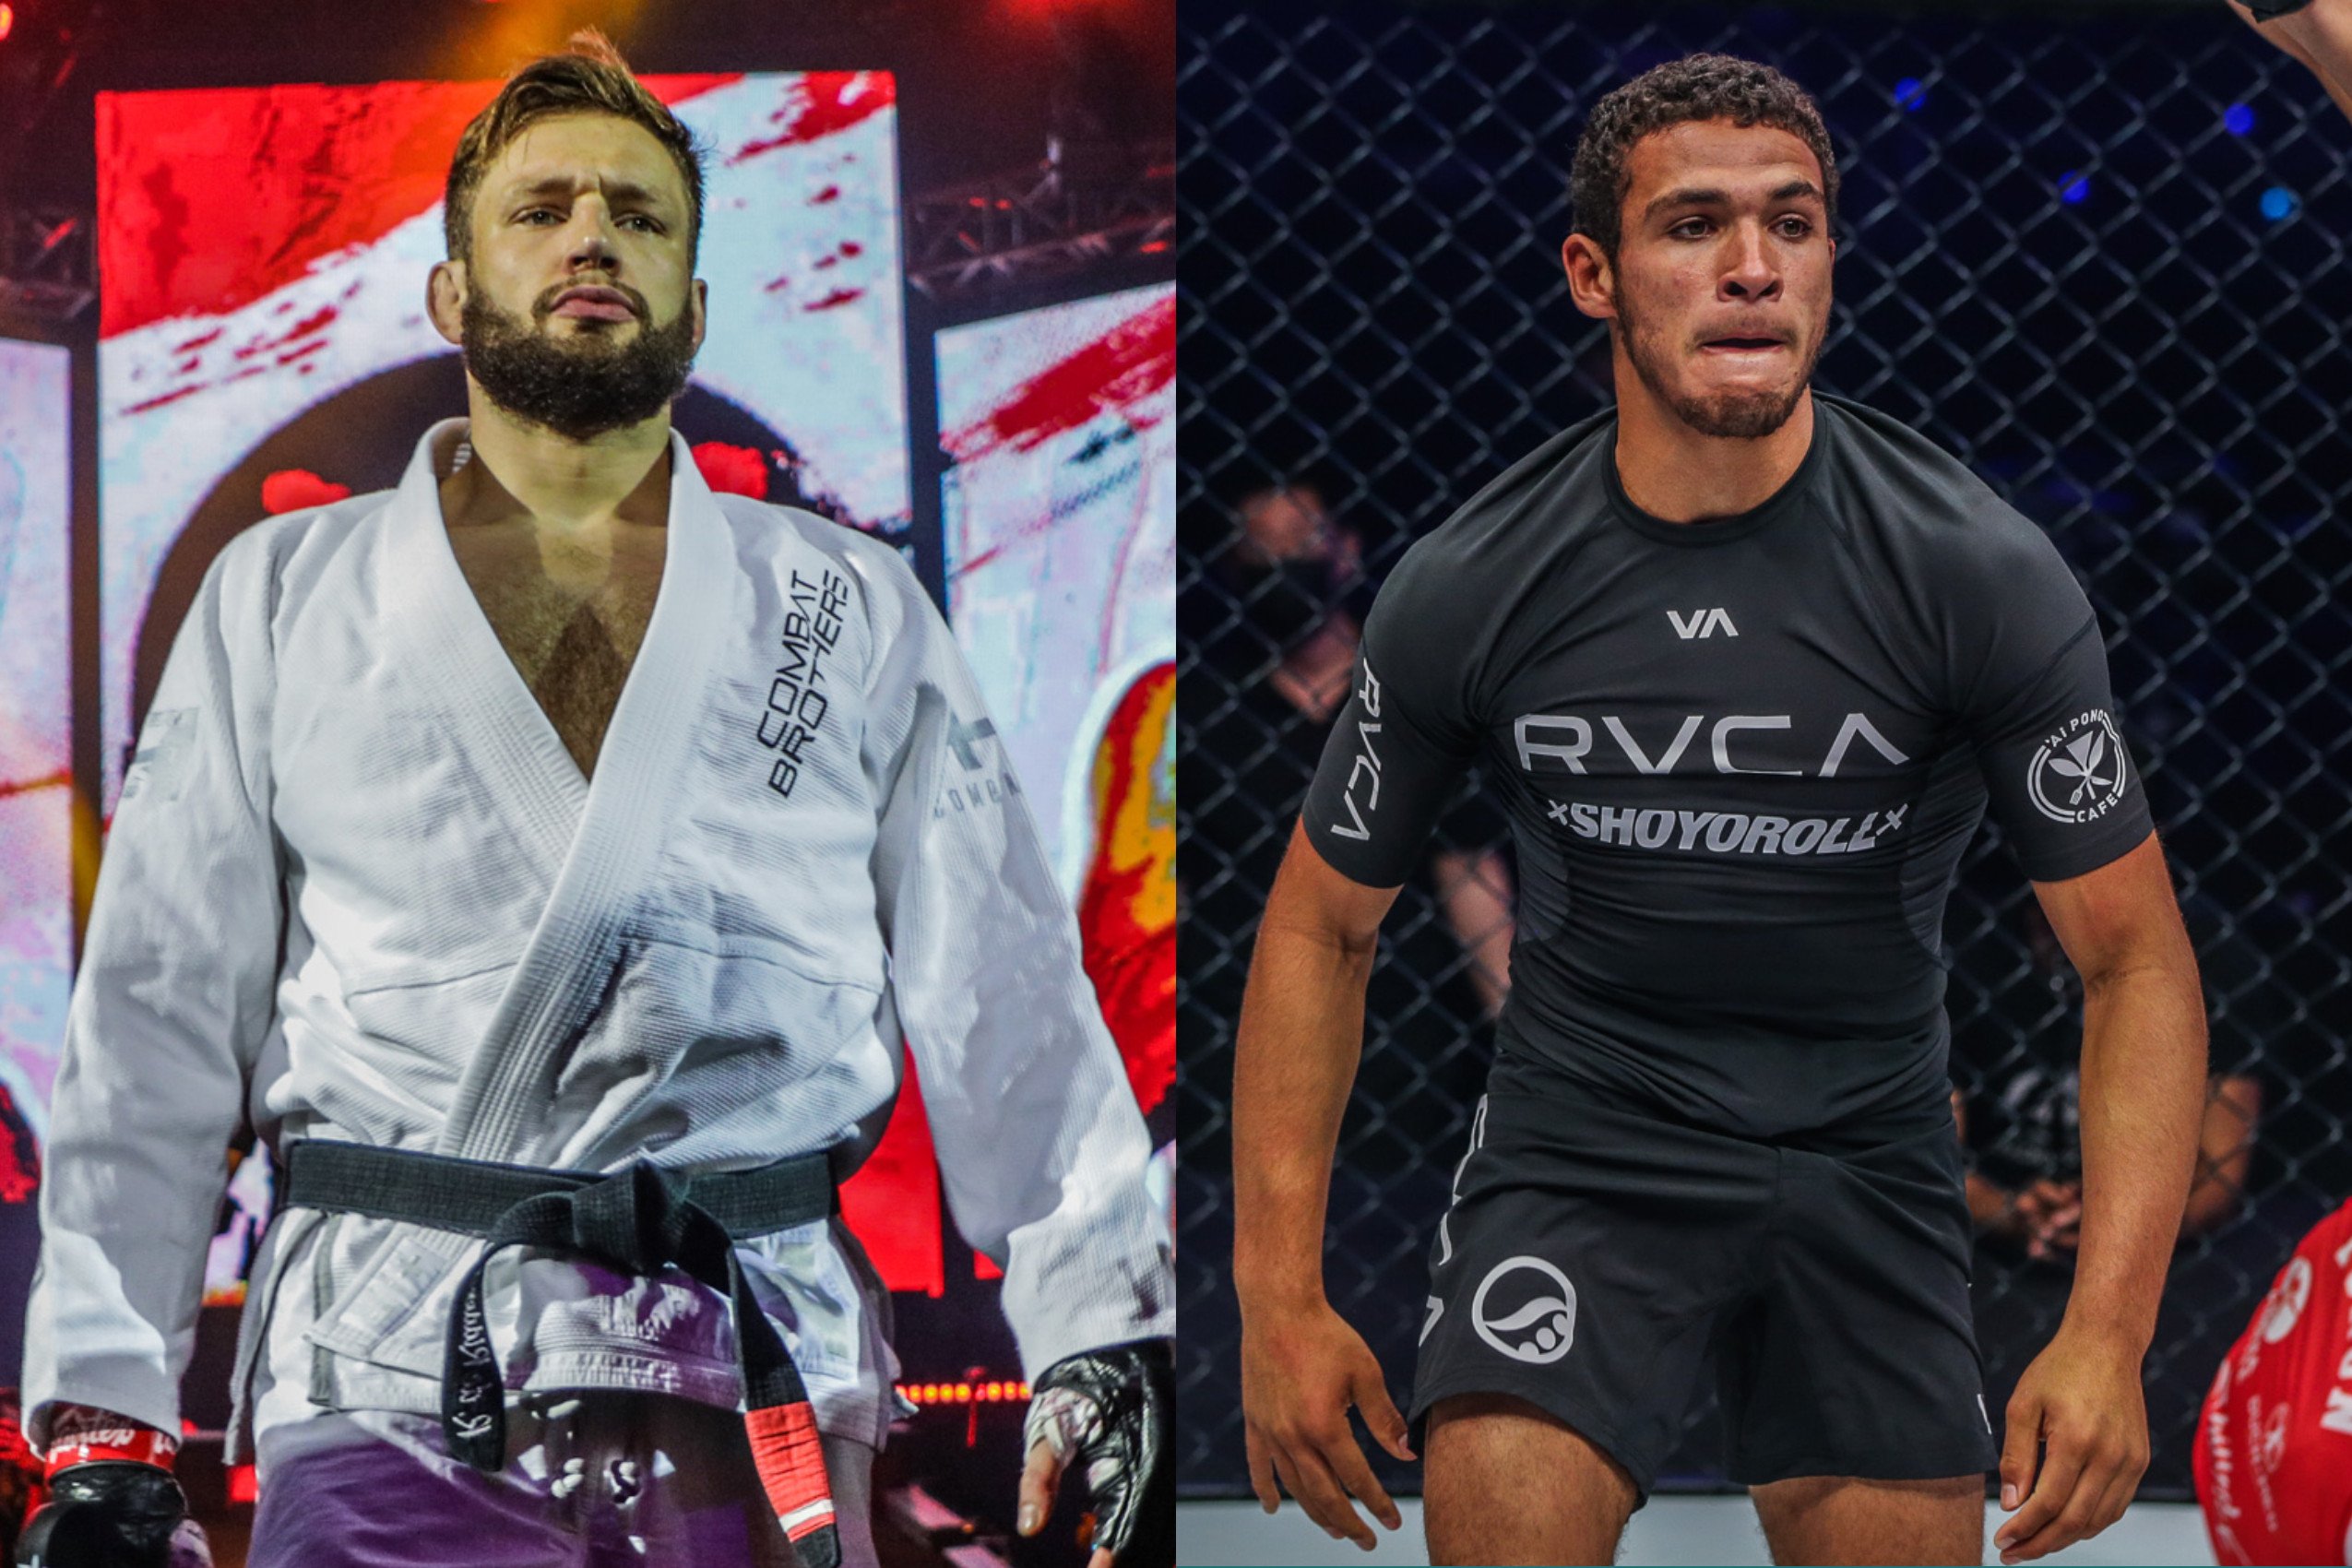 Reinier de Ridder and Tye Ruotolo will face off at ONE Fight Night 10 in Denver. Photos: ONE Championship